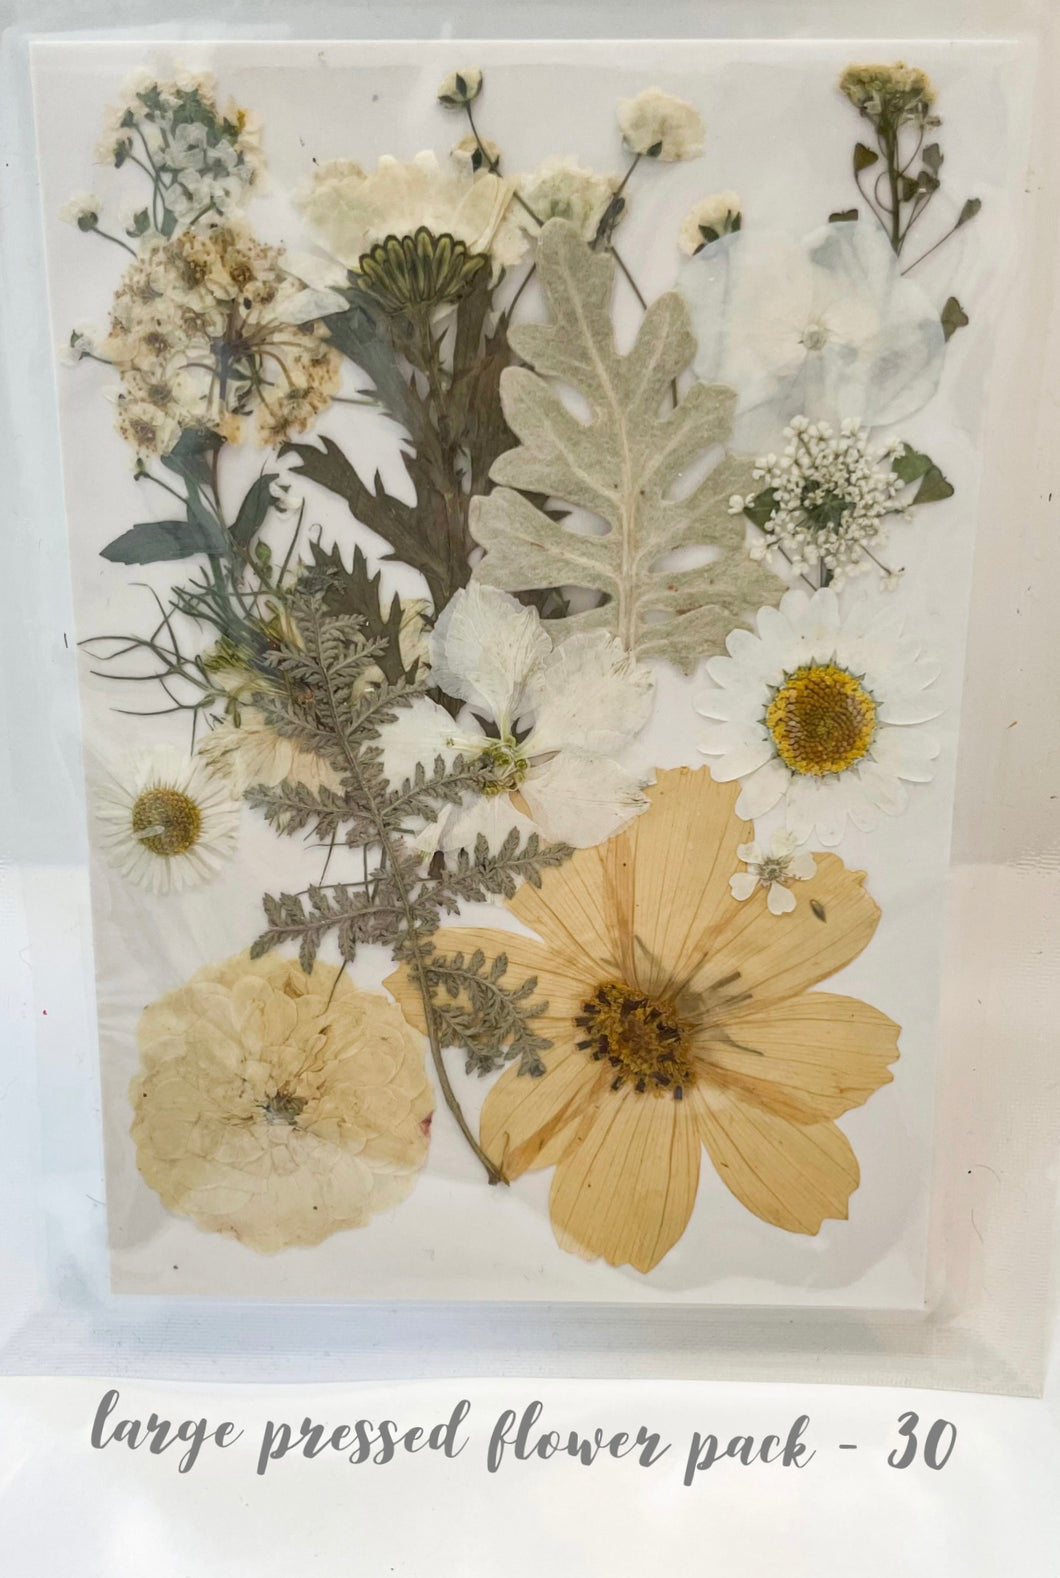 Large Dried Pressed Flower Pack - 30